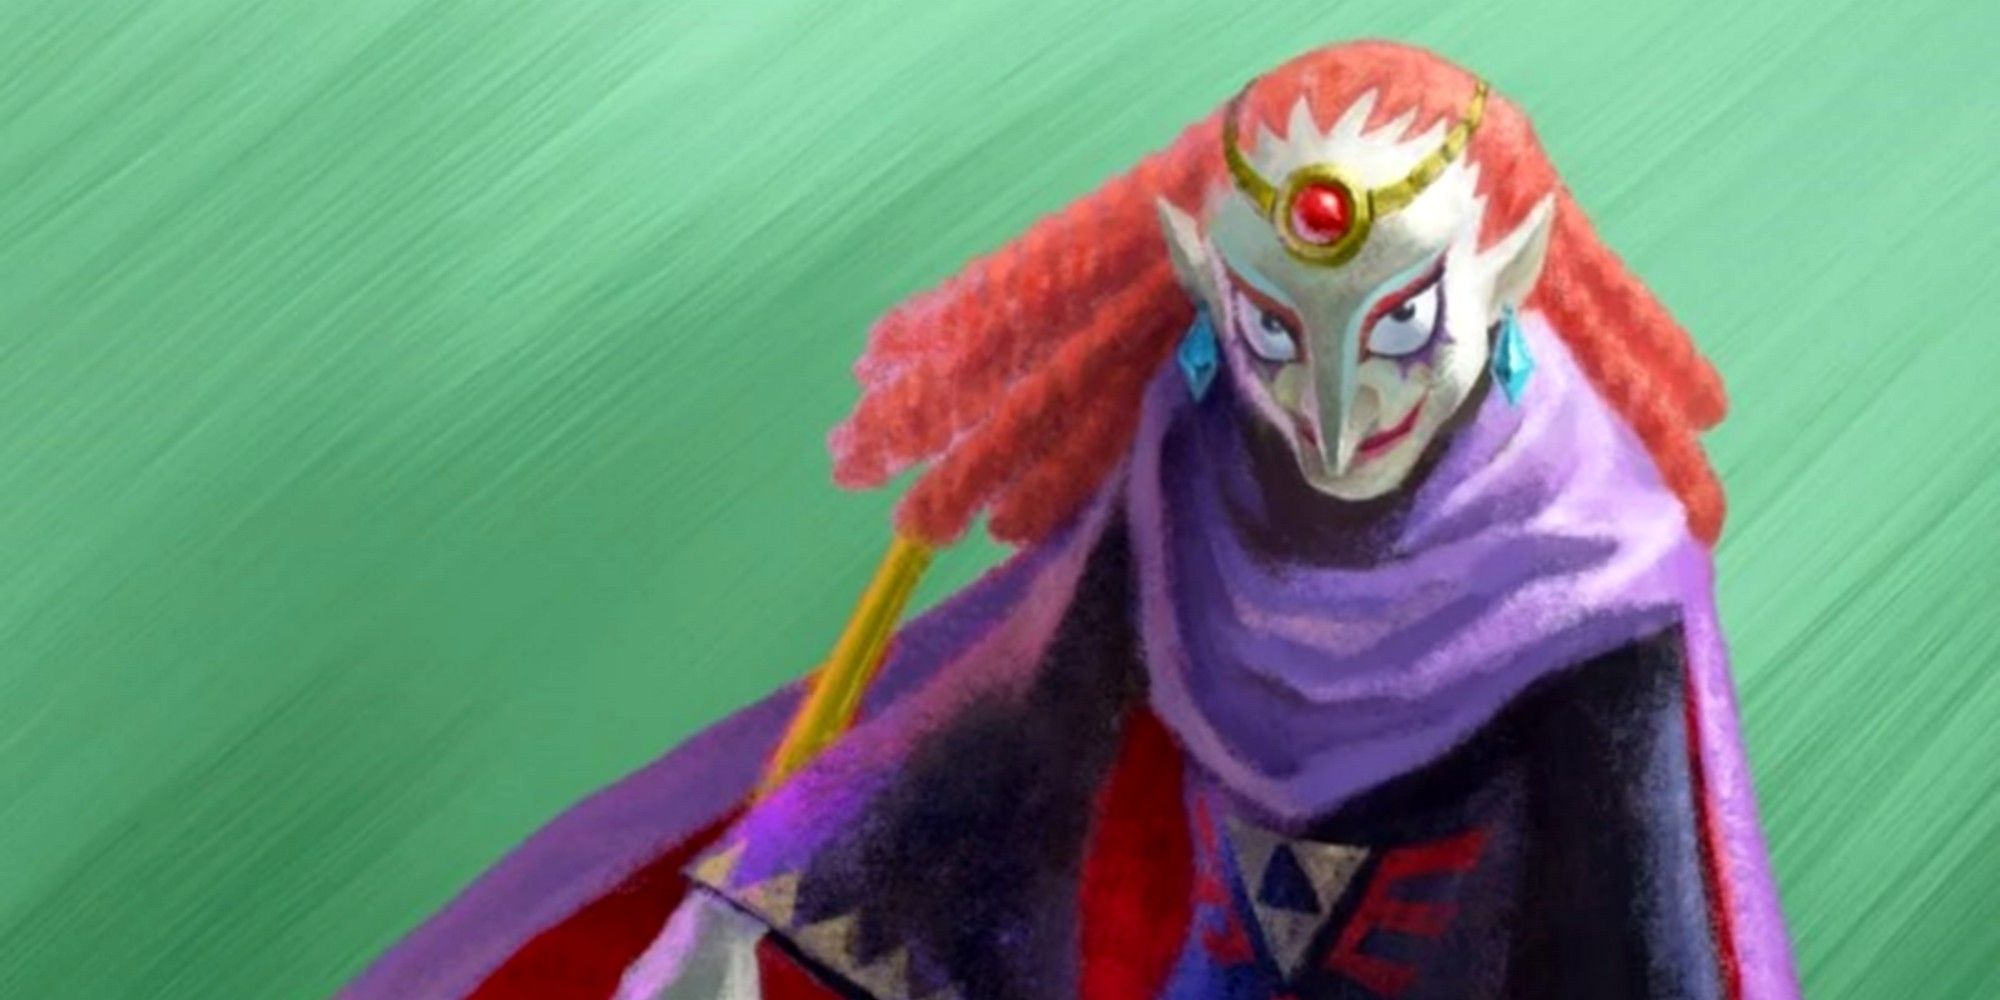 yuga from a link between worlds